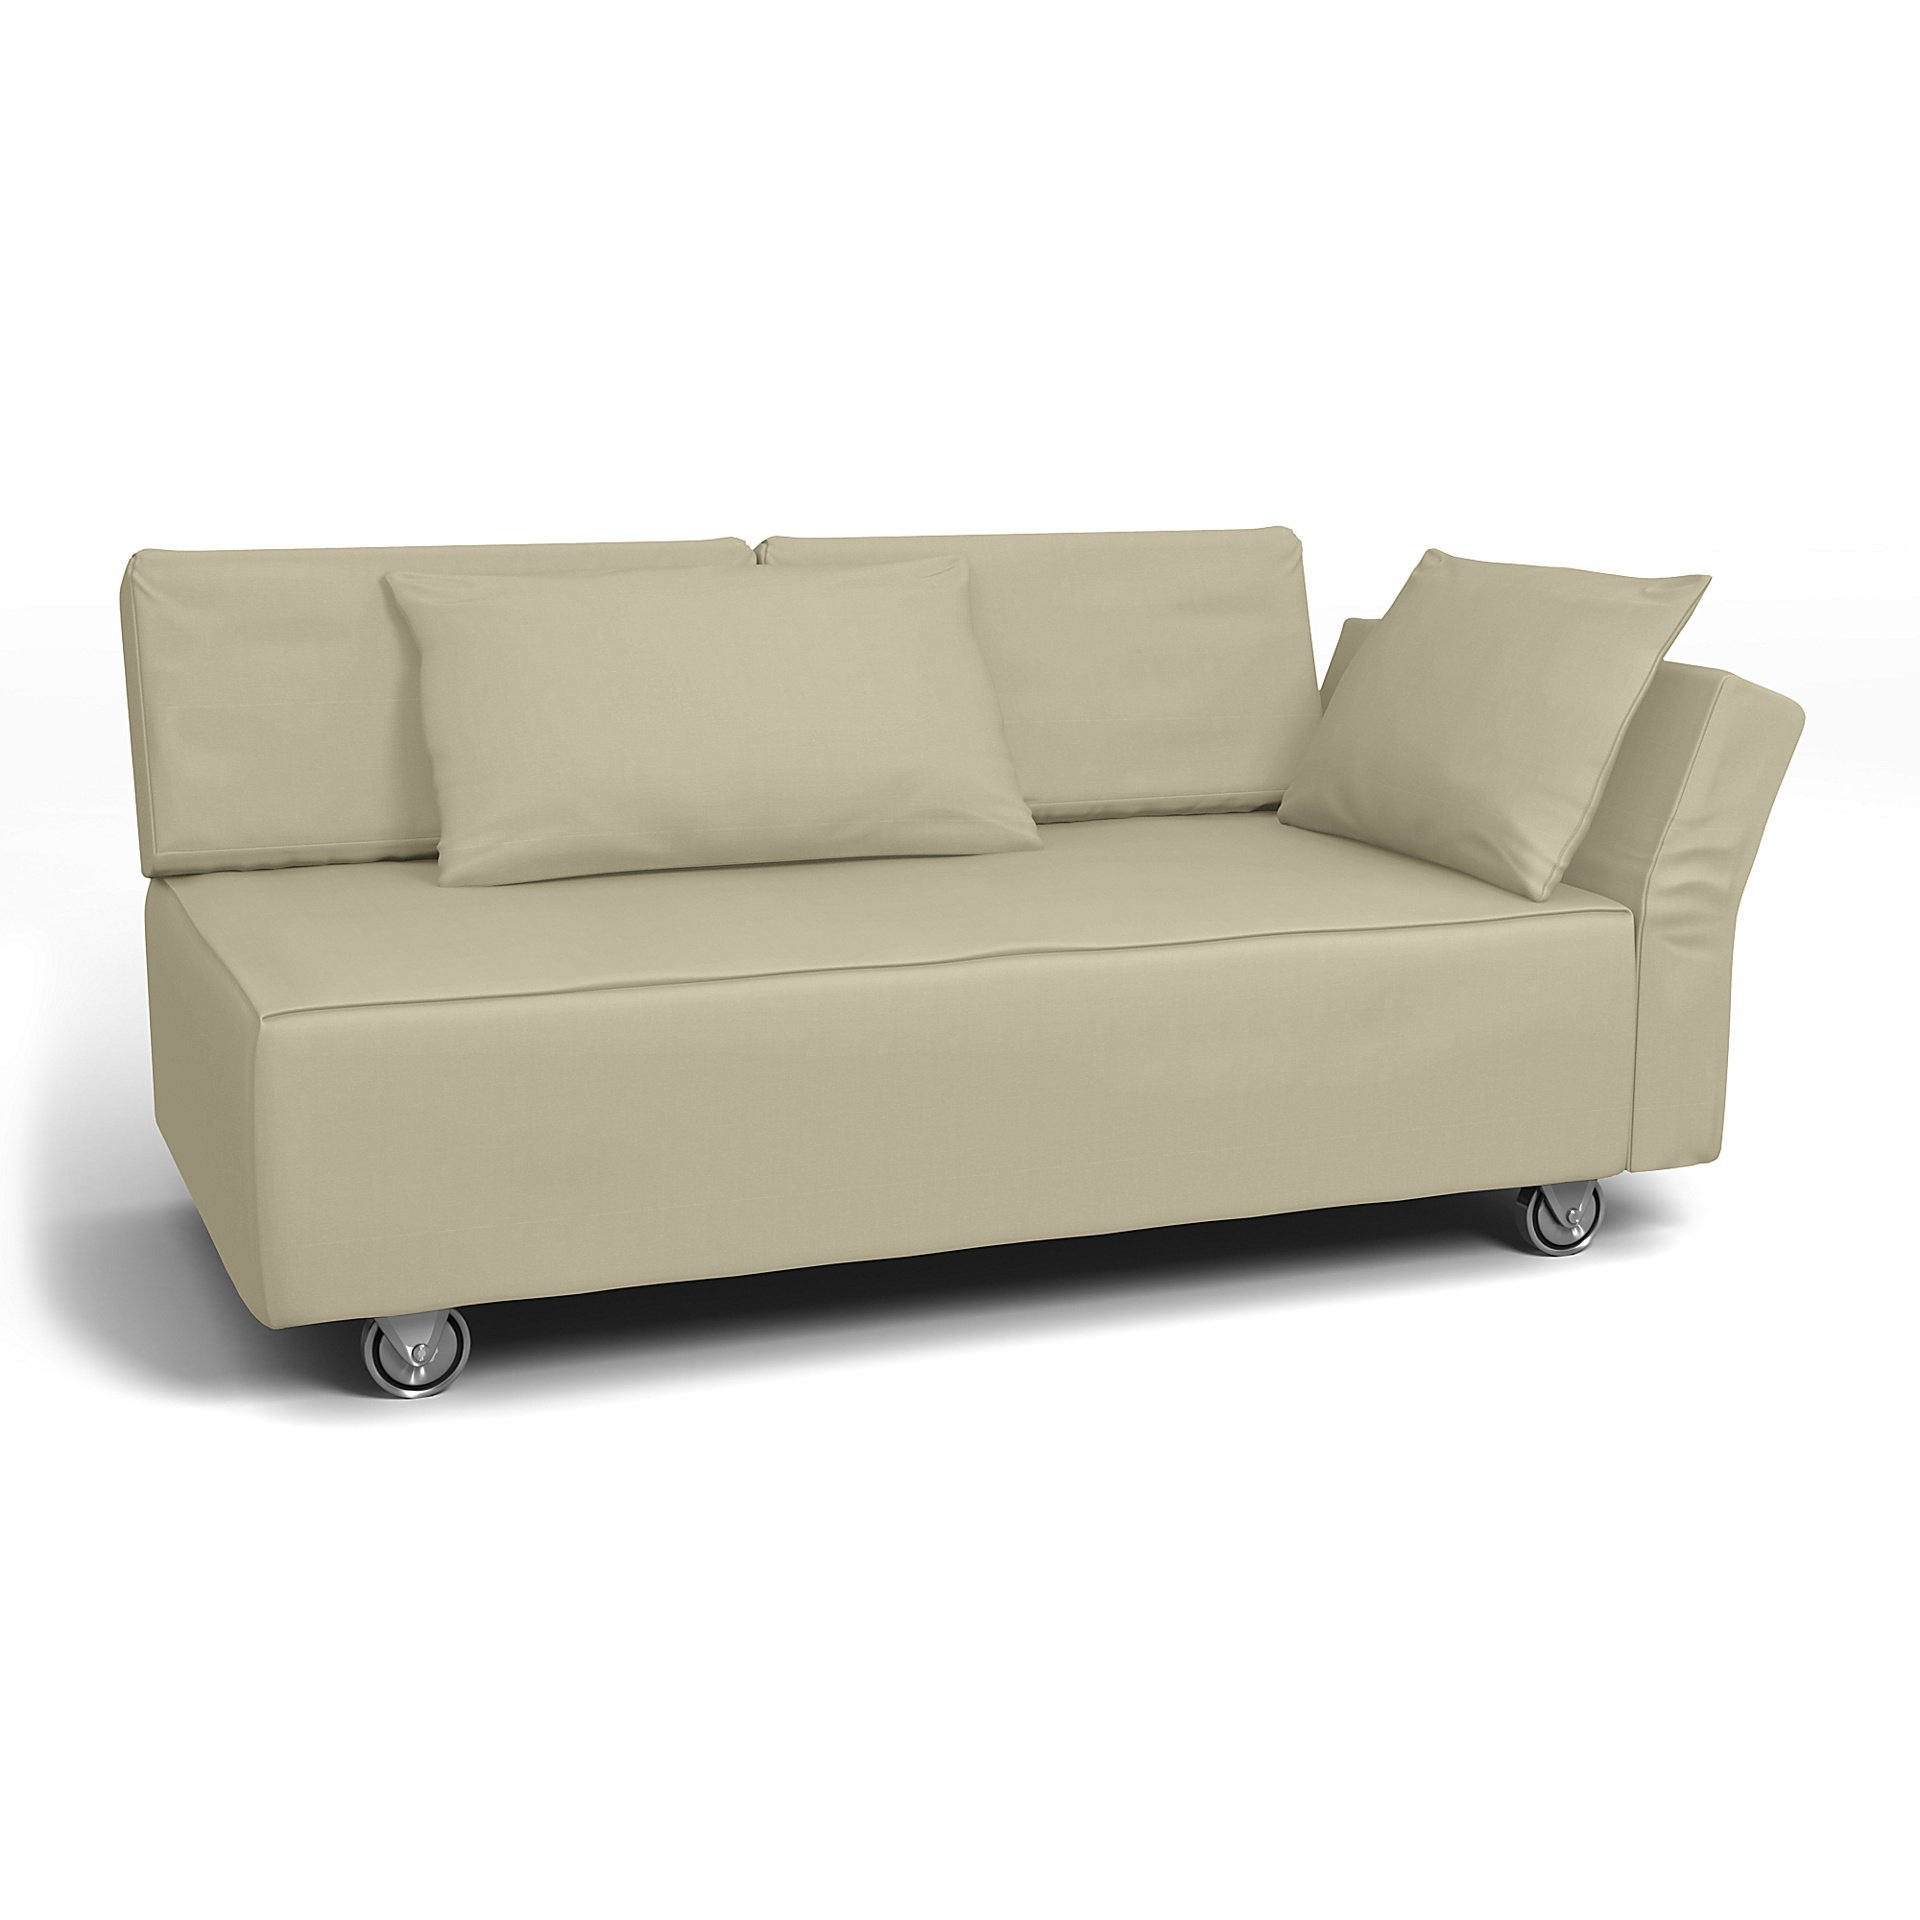 IKEA - Falsterbo 2 Seat Sofa with Right Arm Cover, Sand Beige, Cotton - Bemz